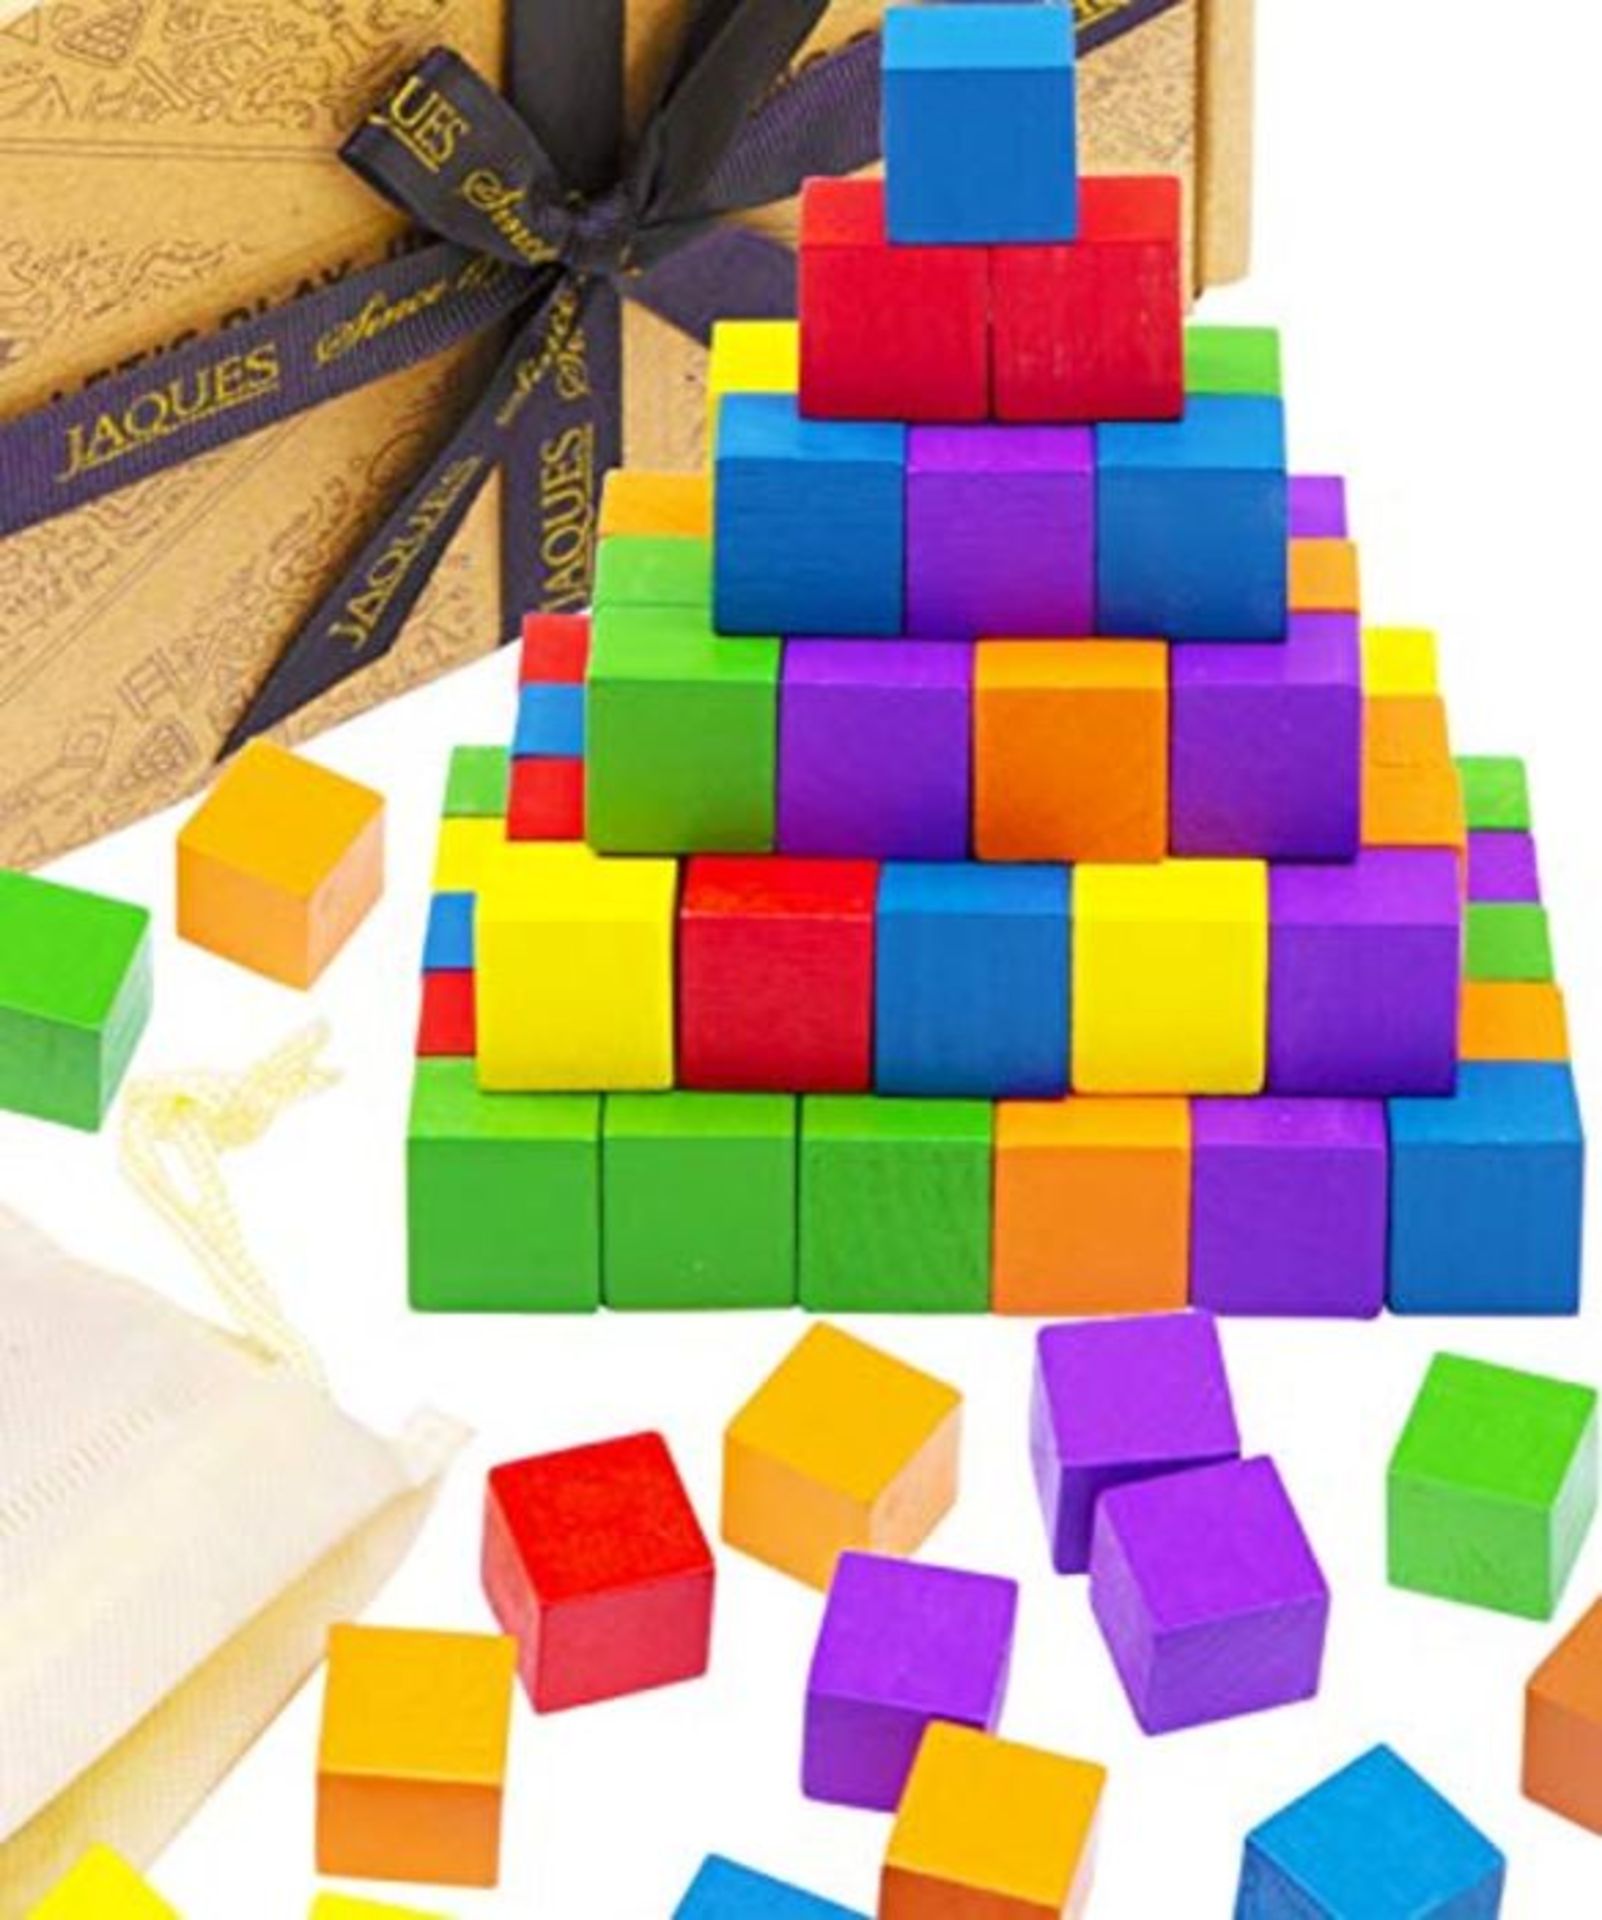 Jaques of London Wooden Building Blocks for Kids | 100 pieces Maths Cubes | Montessori